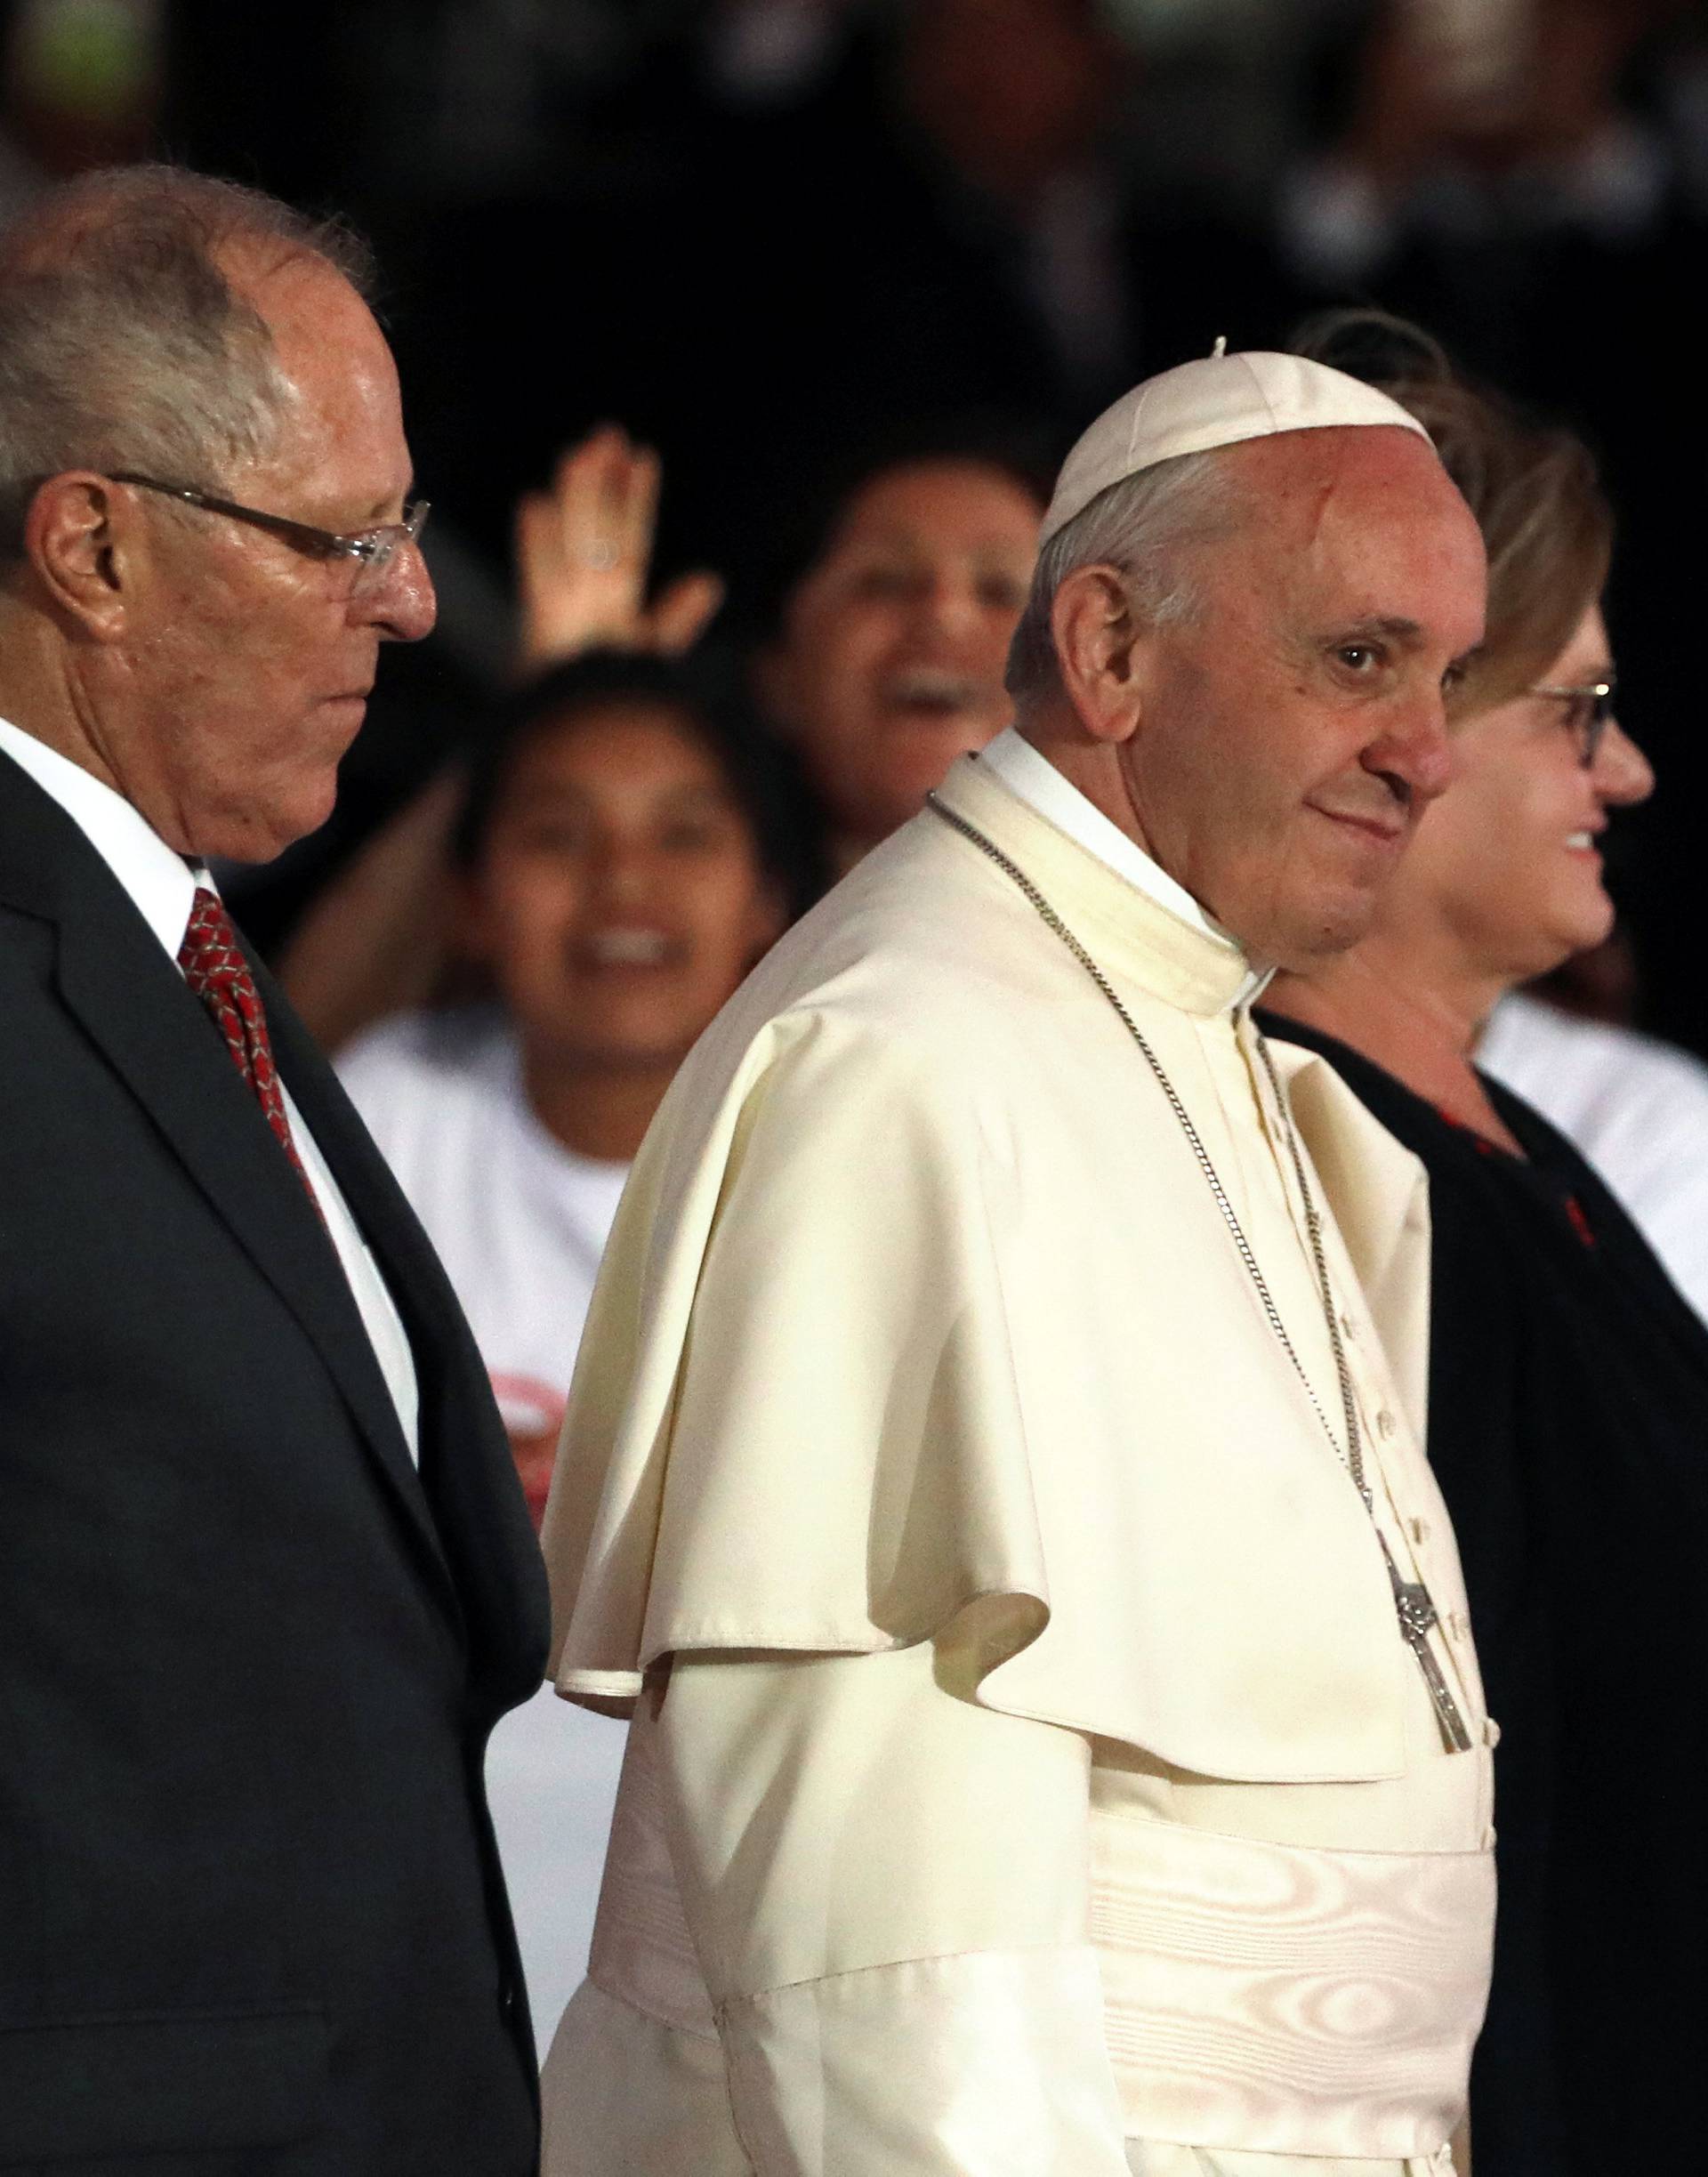 Peru's President Kuczynski, Pope Francis and the first lady walk together during the Pope's farewell ceremony, in Lima